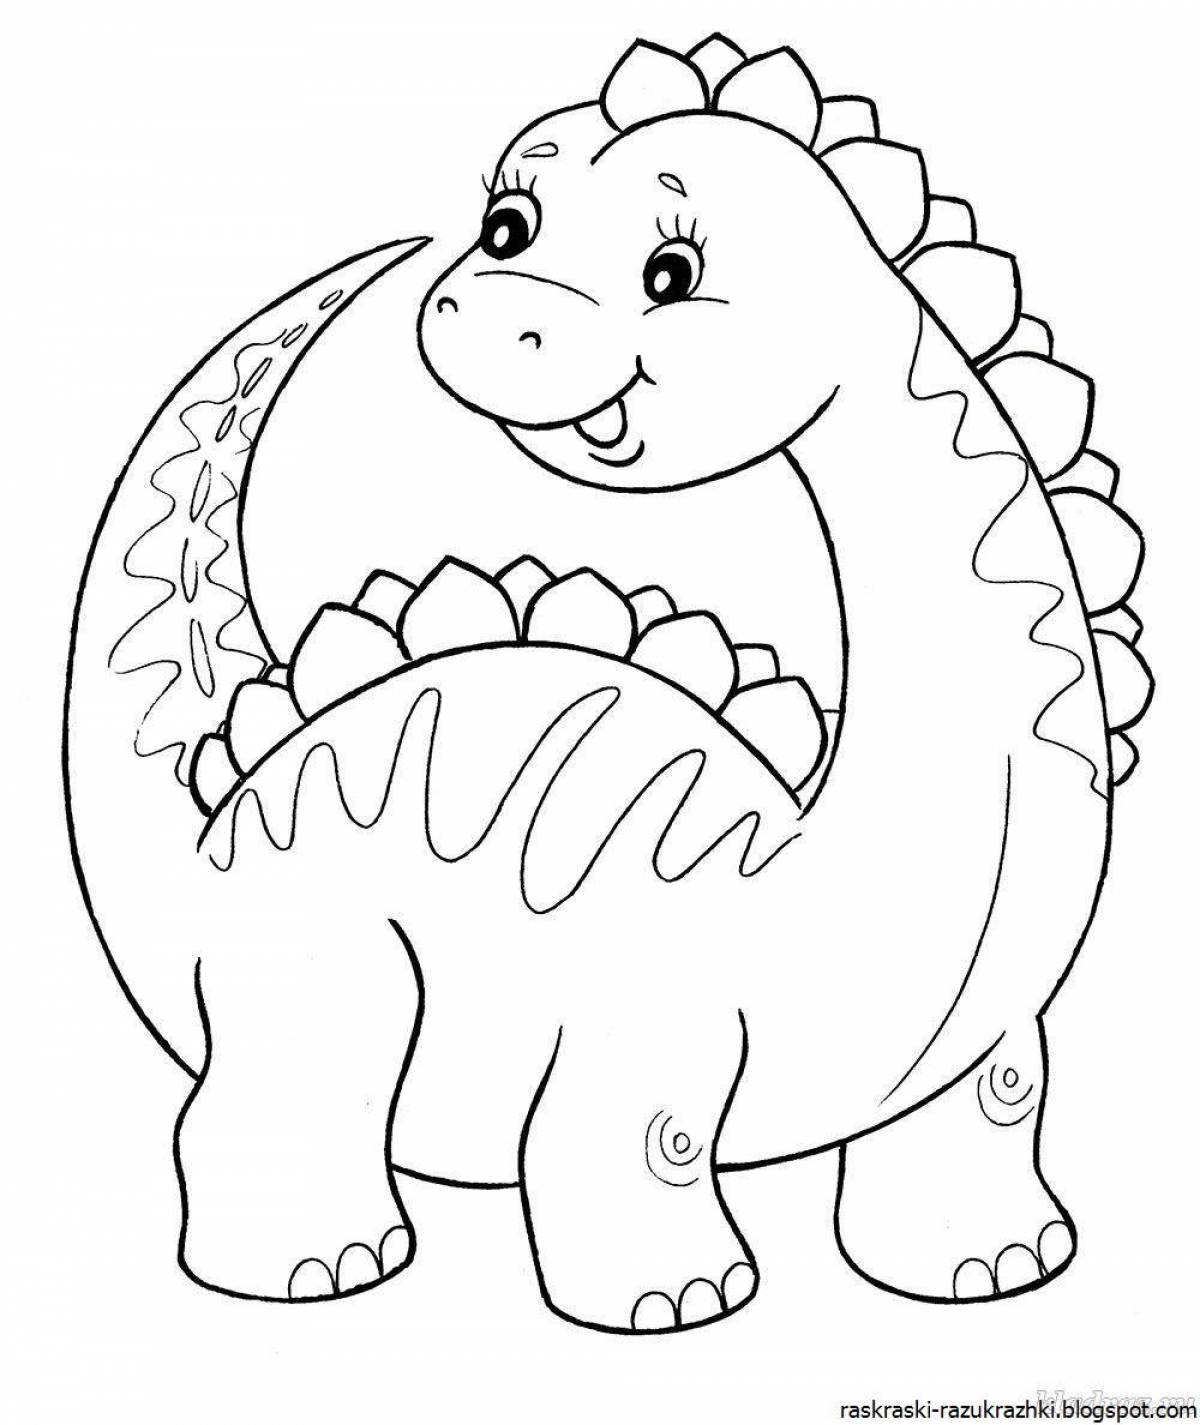 Coloring pages with a playful dinosaur for children 4-5 years old